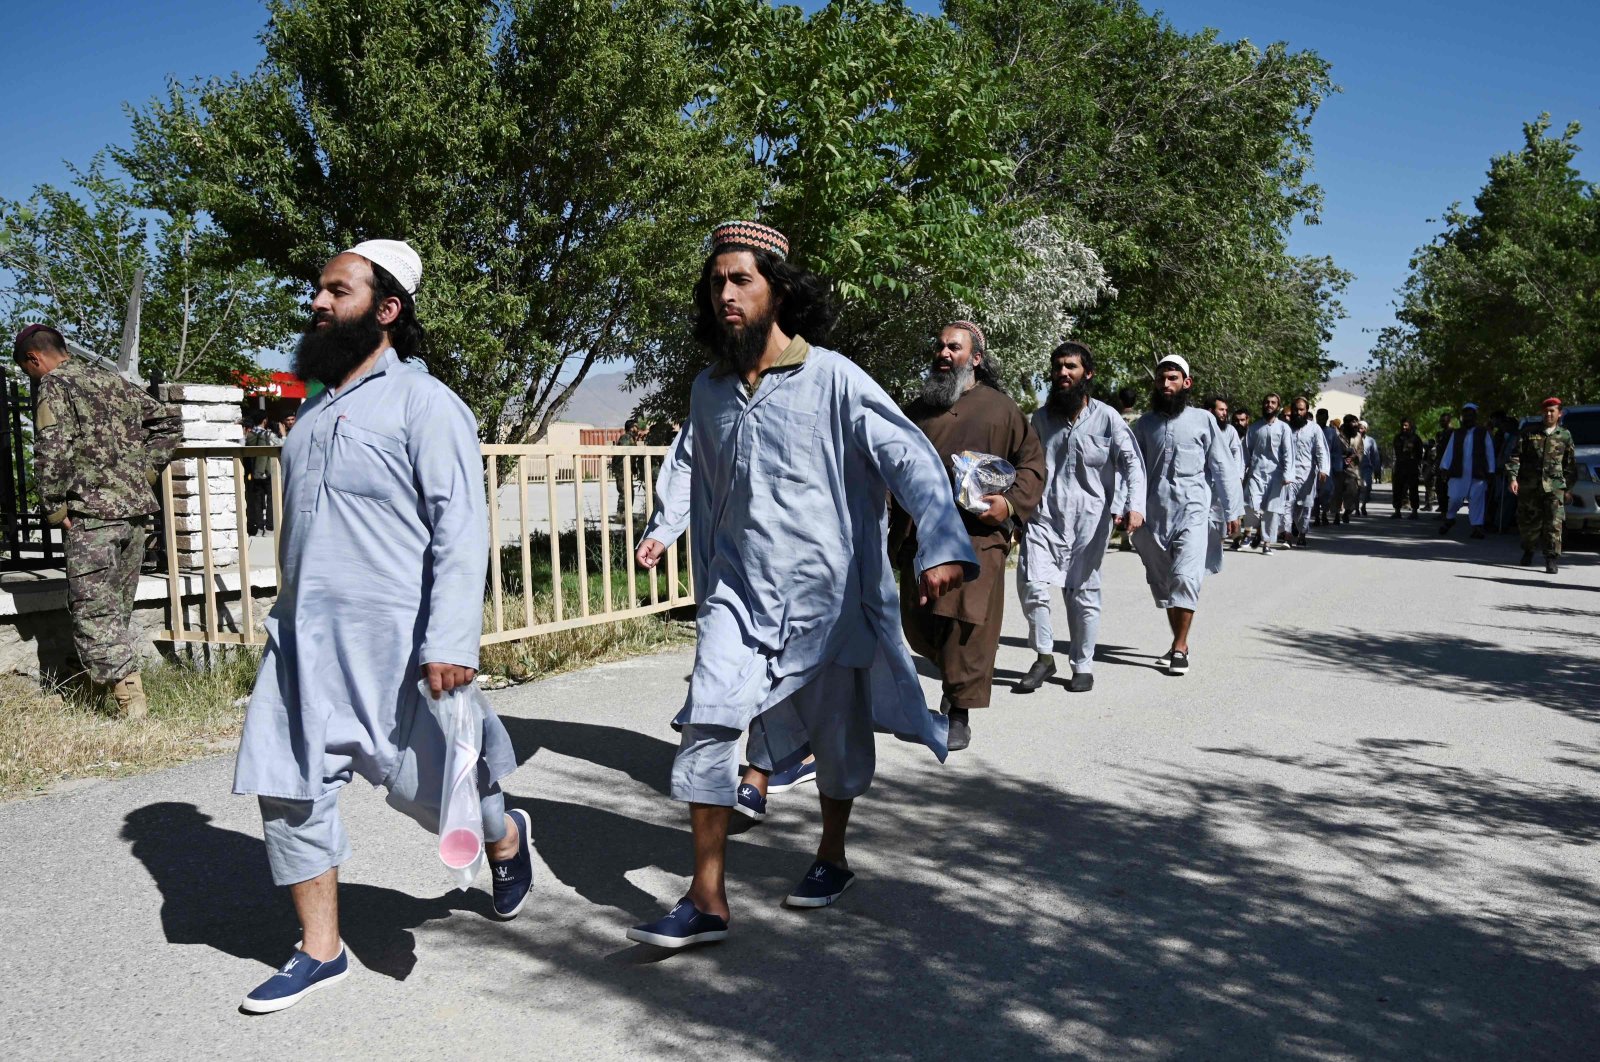 Taliban prisoners walk in line during their release from the Bagram prison, next to the U.S. military base, Bagram, Afghanistan, May 26, 2020. (AFP Photo)